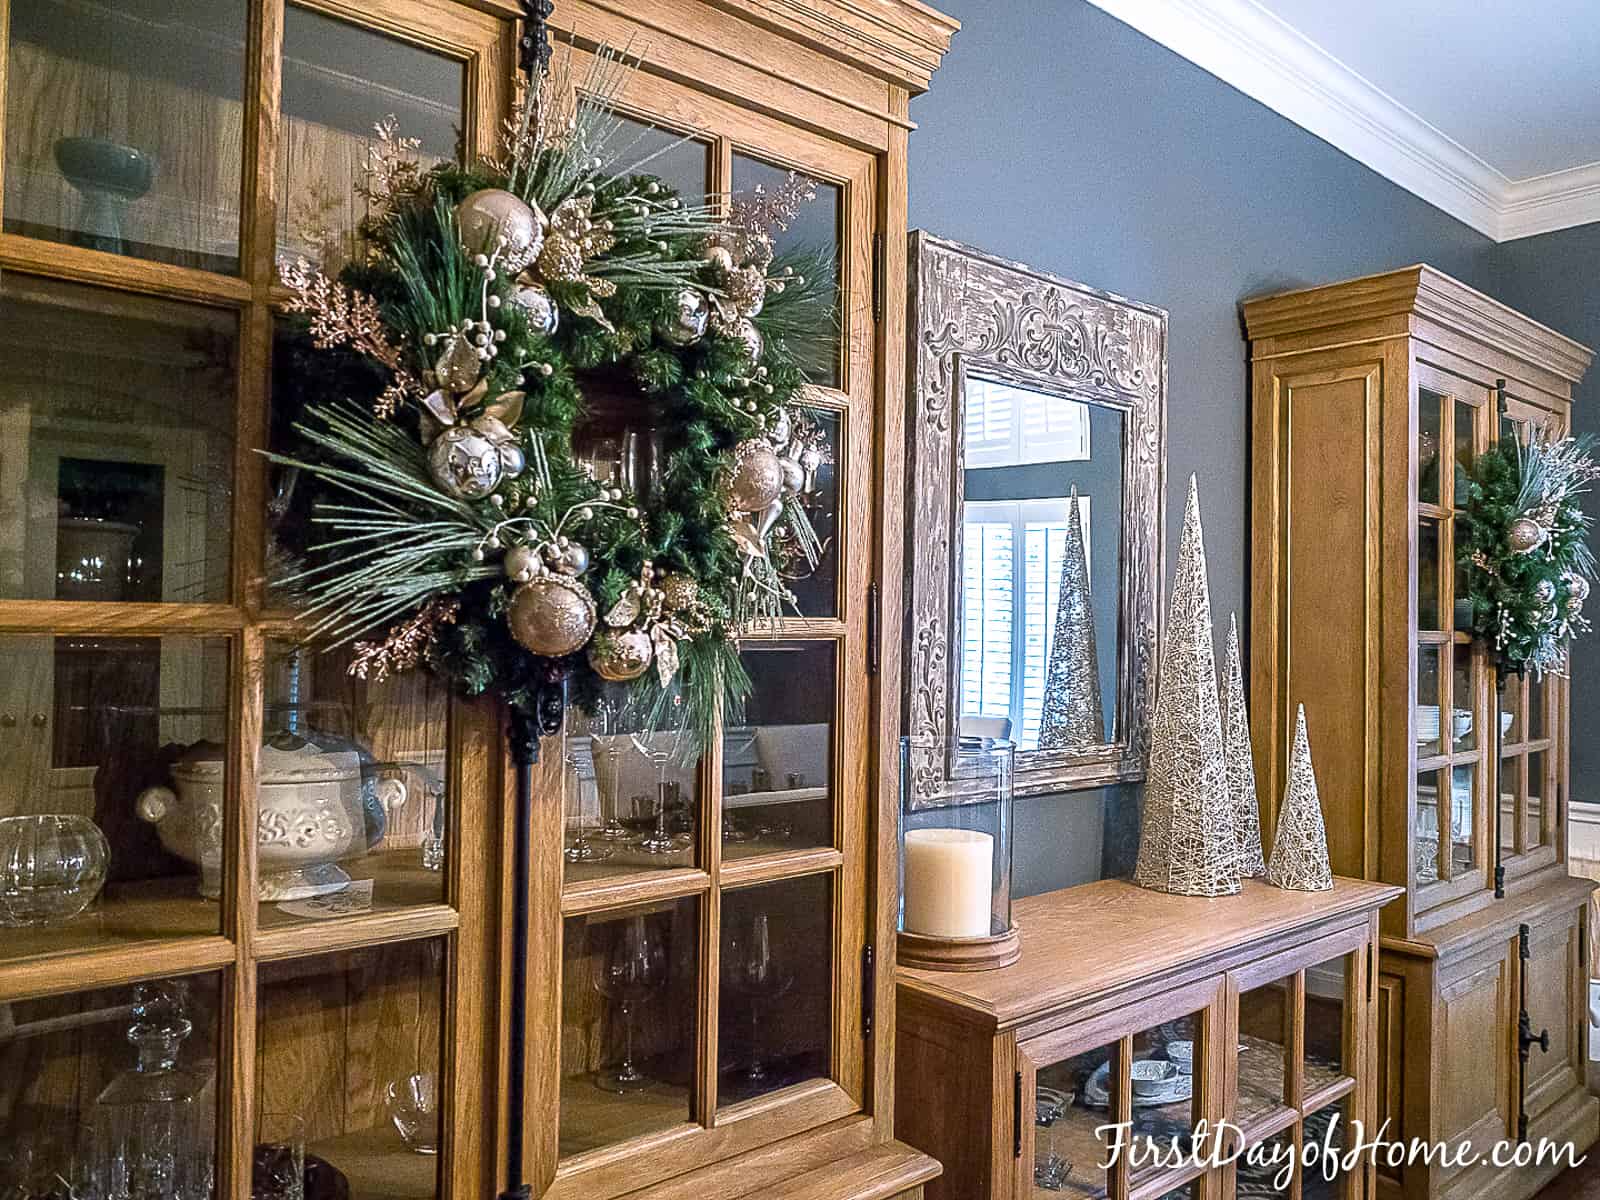 Homemade Christmas wreath hanging on cabinet